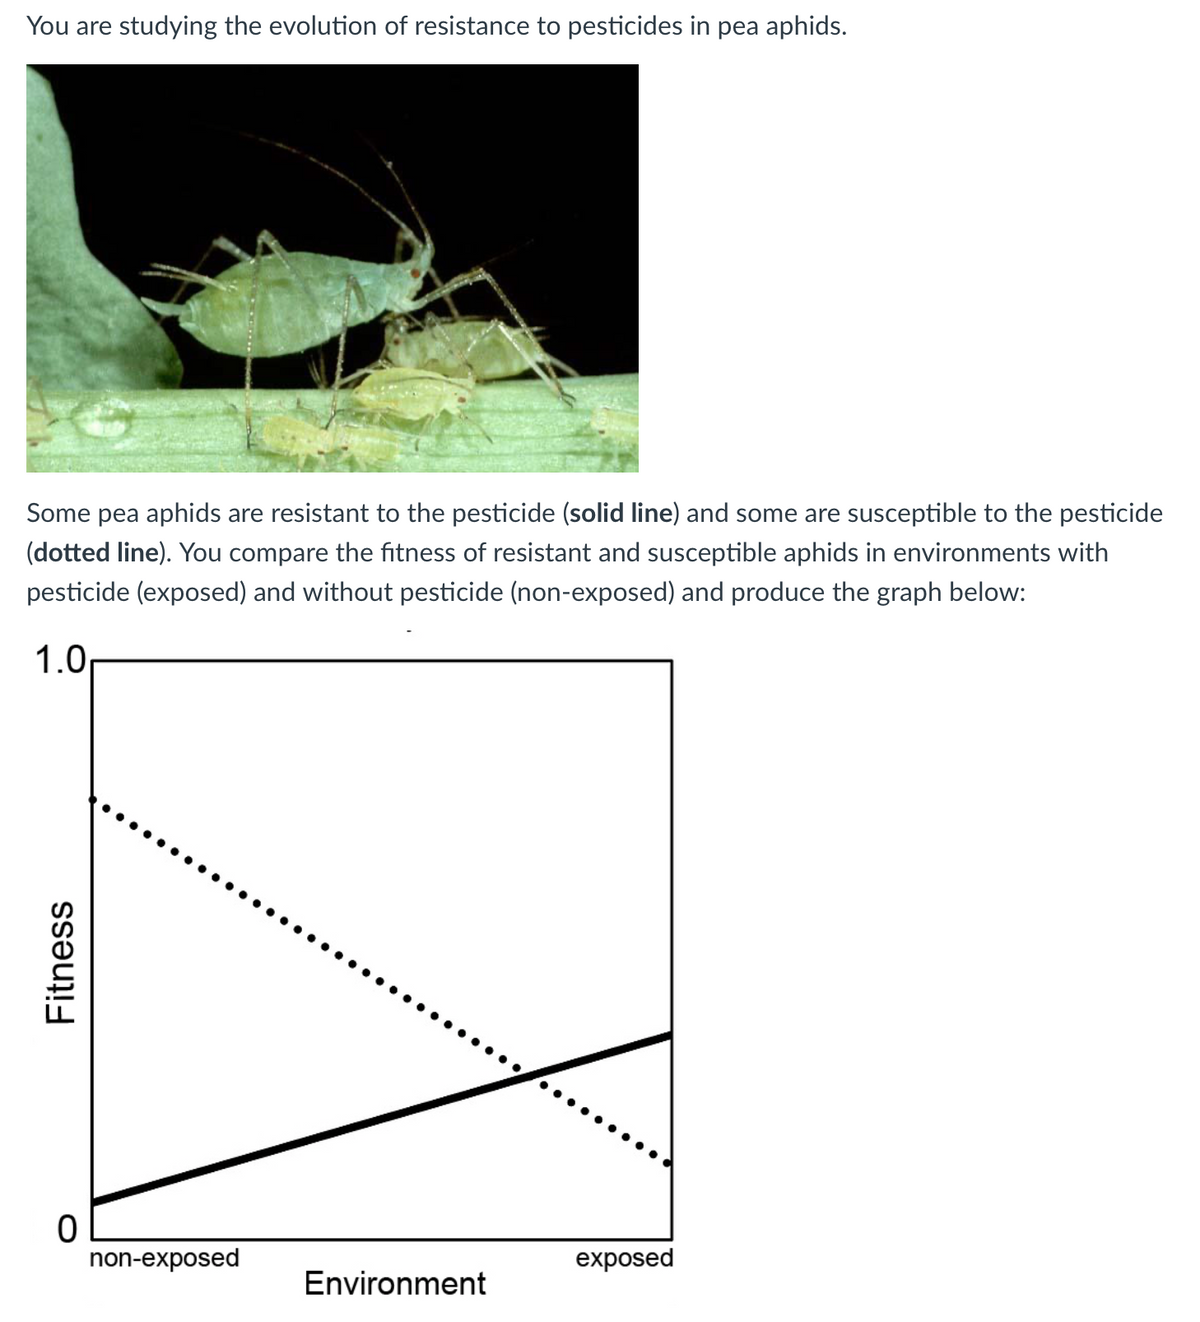 You are studying the evolution of resistance to pesticides in pea aphids.
Some pea aphids are resistant to the pesticide (solid line) and some are susceptible to the pesticide
(dotted line). You compare the fitness of resistant and susceptible aphids in environments with
pesticide (exposed) and without pesticide (non-exposed) and produce the graph below:
1.0
non-exposed
exposed
Environment
Fitness
